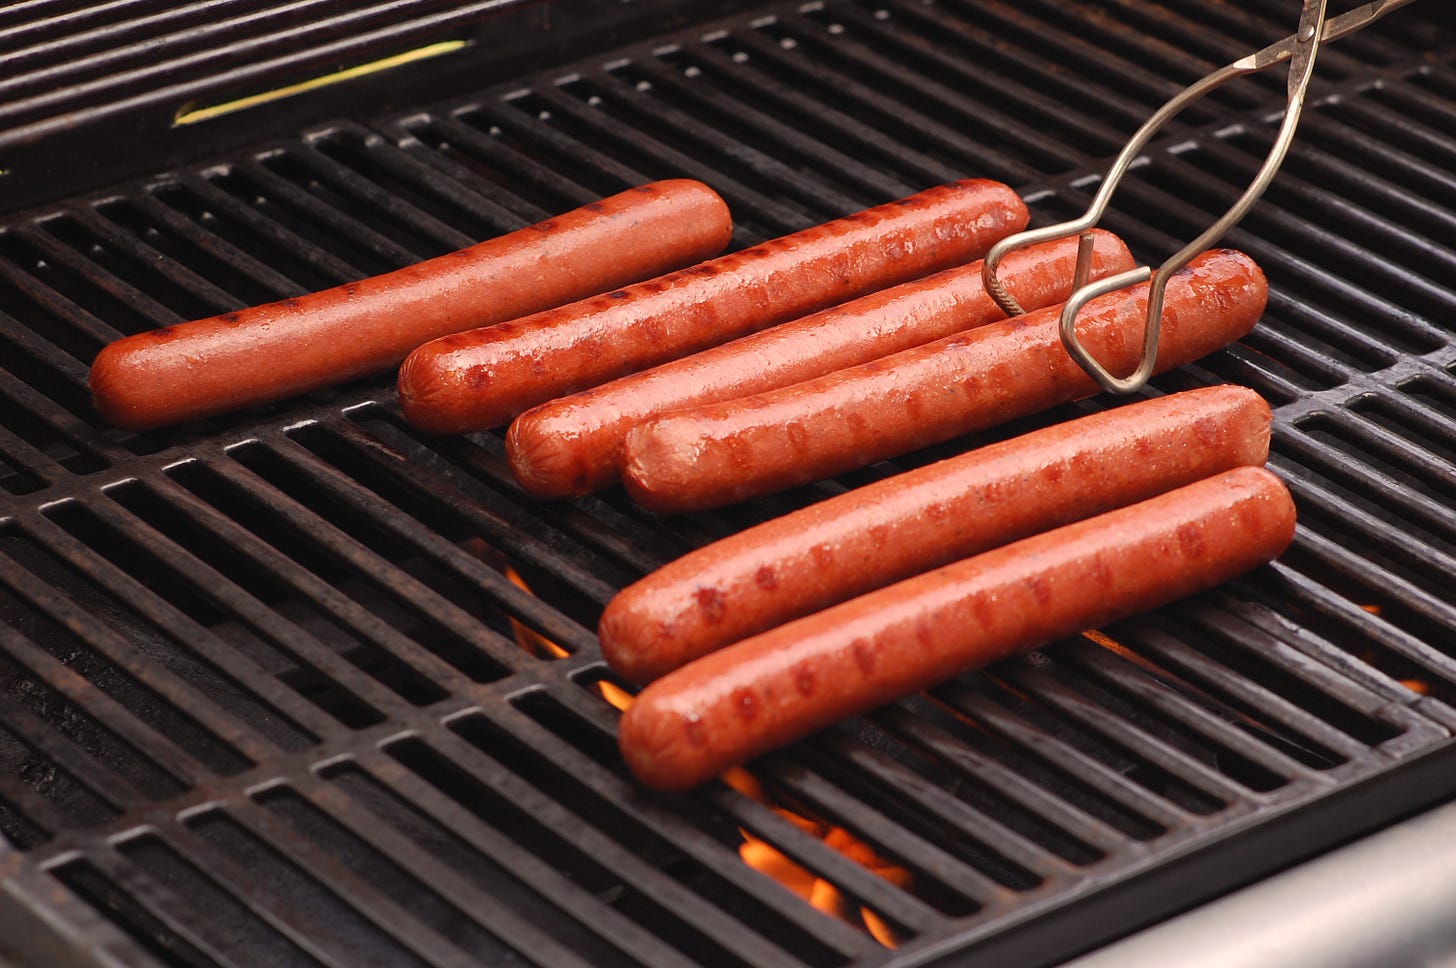 6 long hot dogs on a clean grill, one being turned with some metal tongs